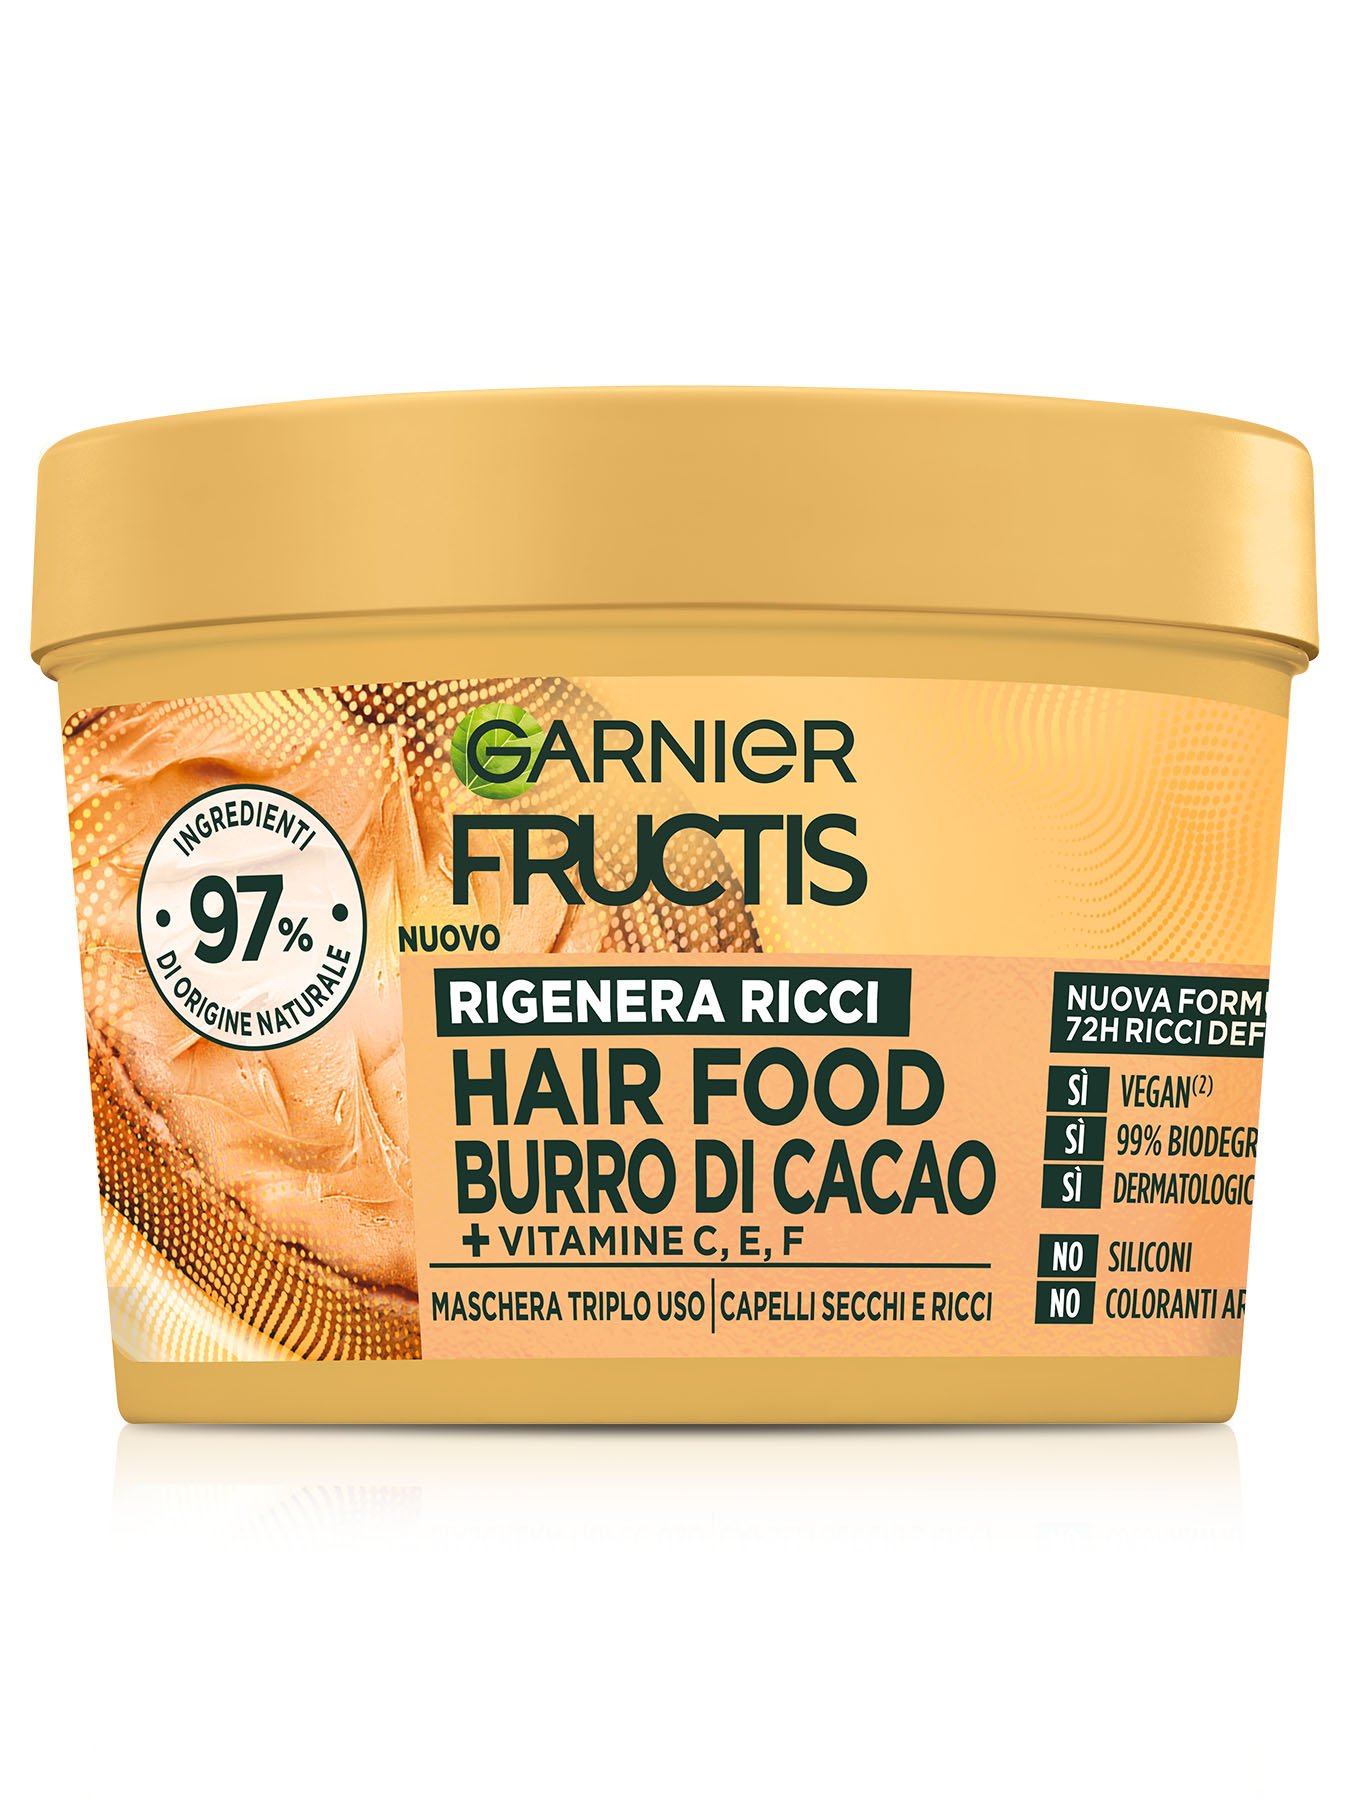 Fructis Hair Food Cacao Mask